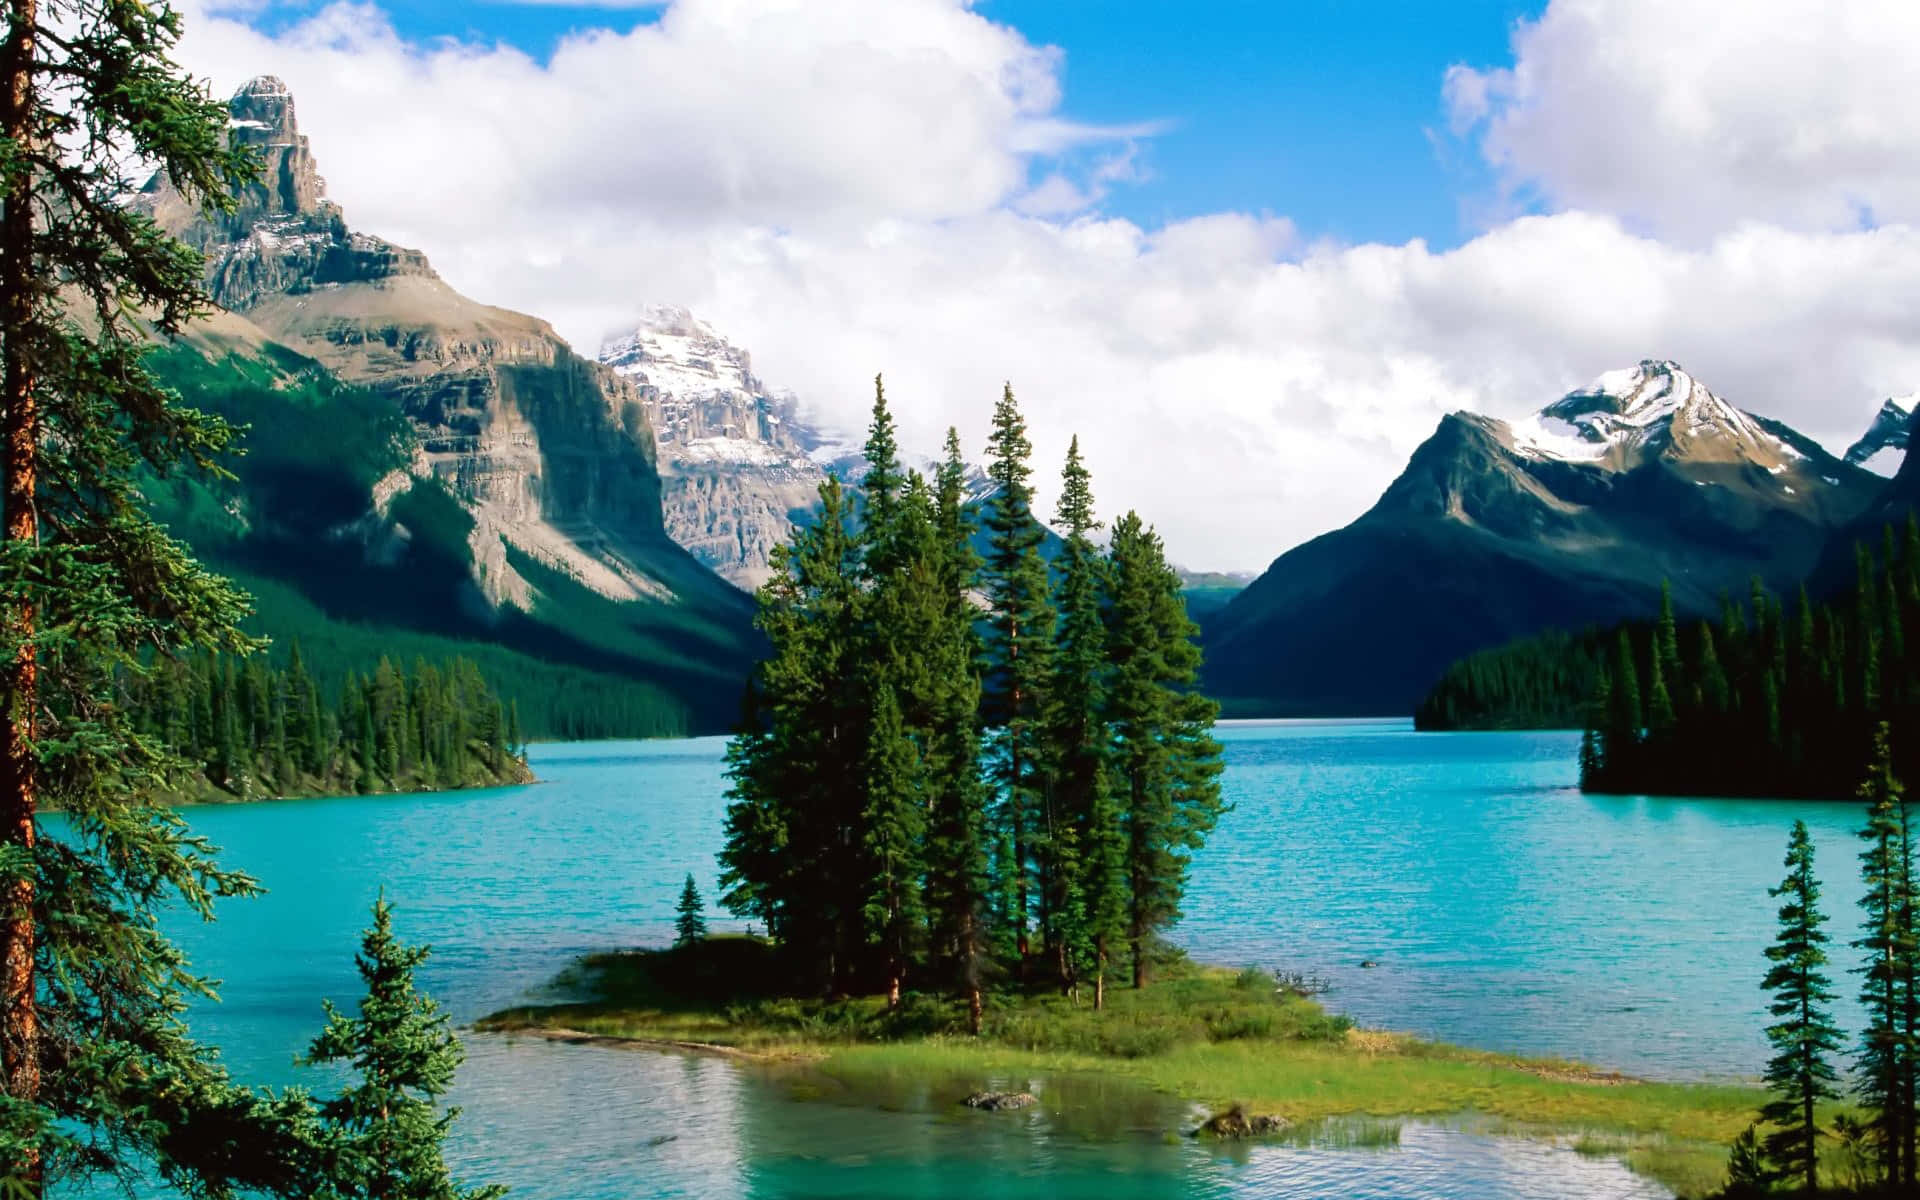 Serene lake surrounded by tall trees and grassy hills